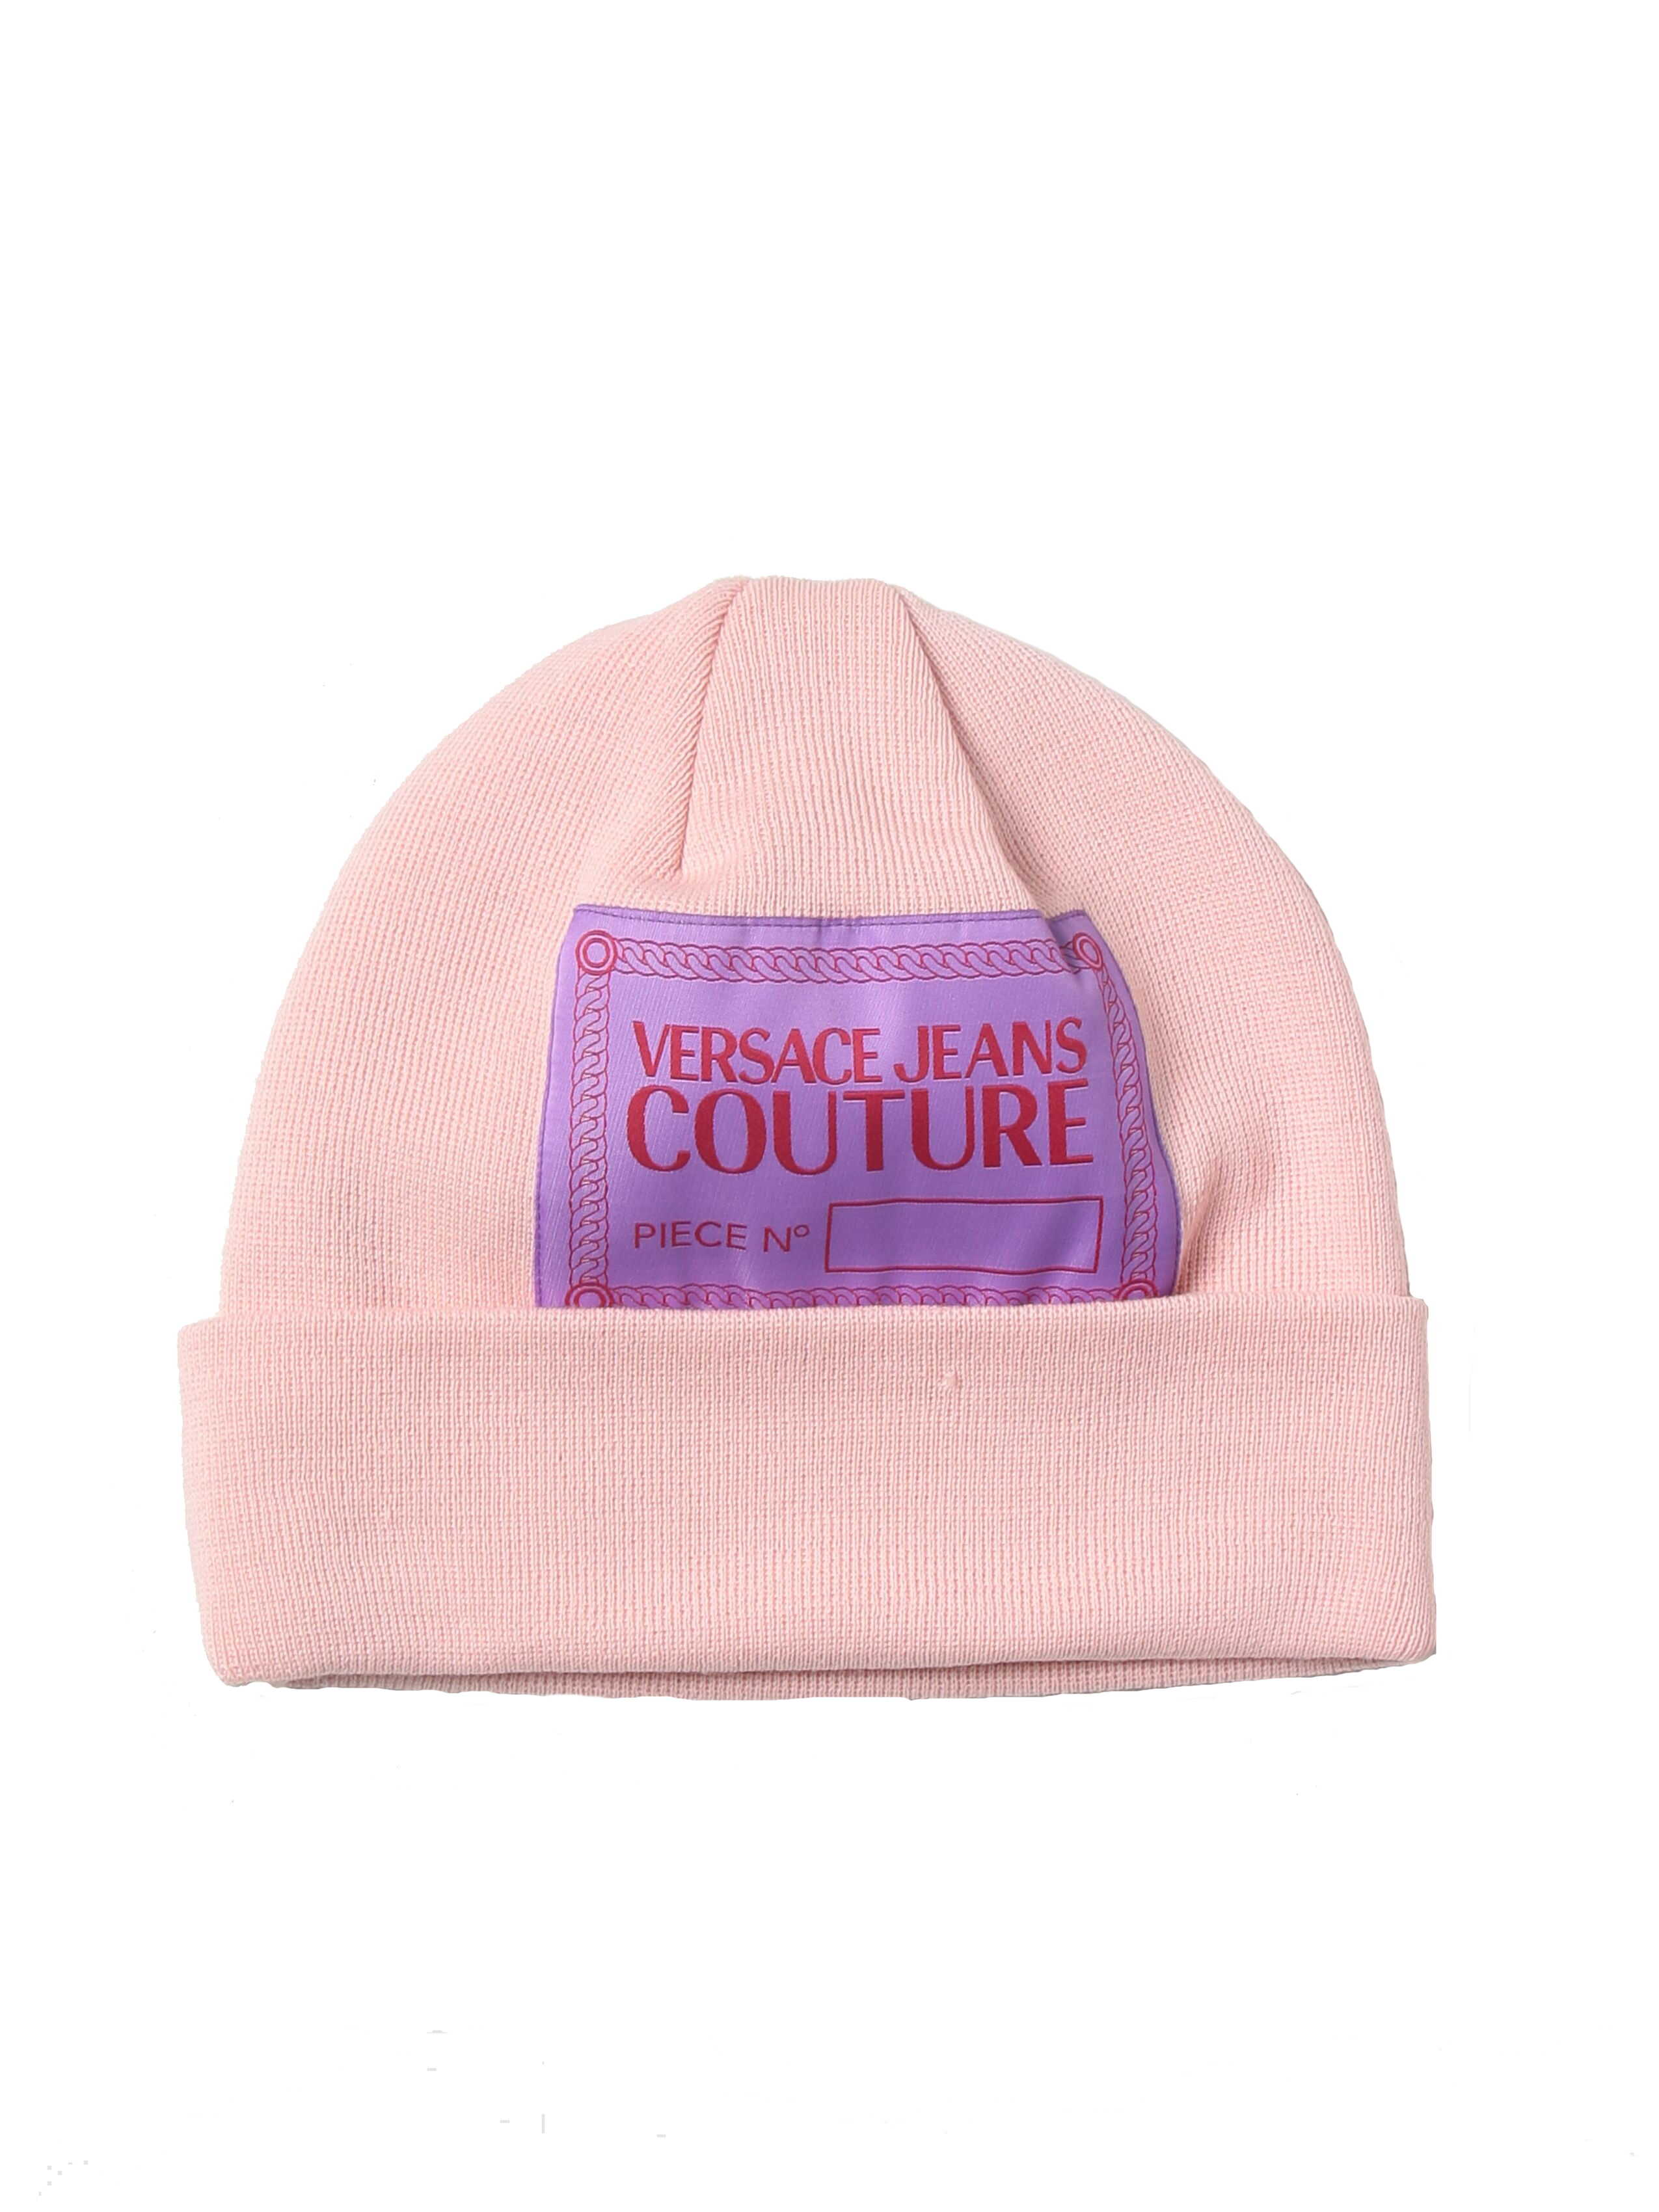 Versace Jeans Couture Piece Number Beanie ROSA ANTICO